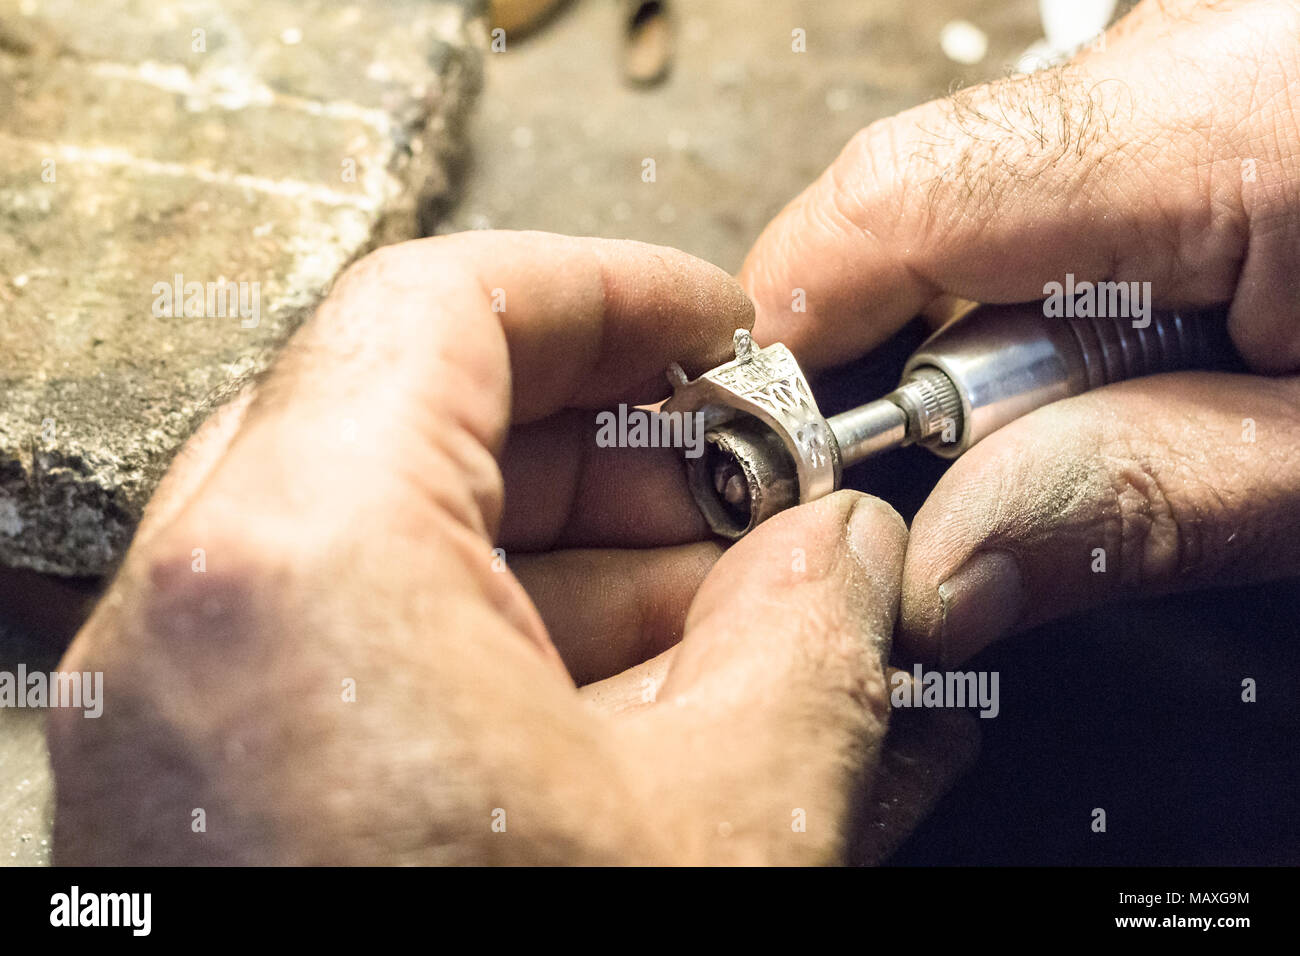 Male jeweler polishing a silver ring with a slotted mandrel for sandpaper, mounted on a flex shaft. Stock Photo